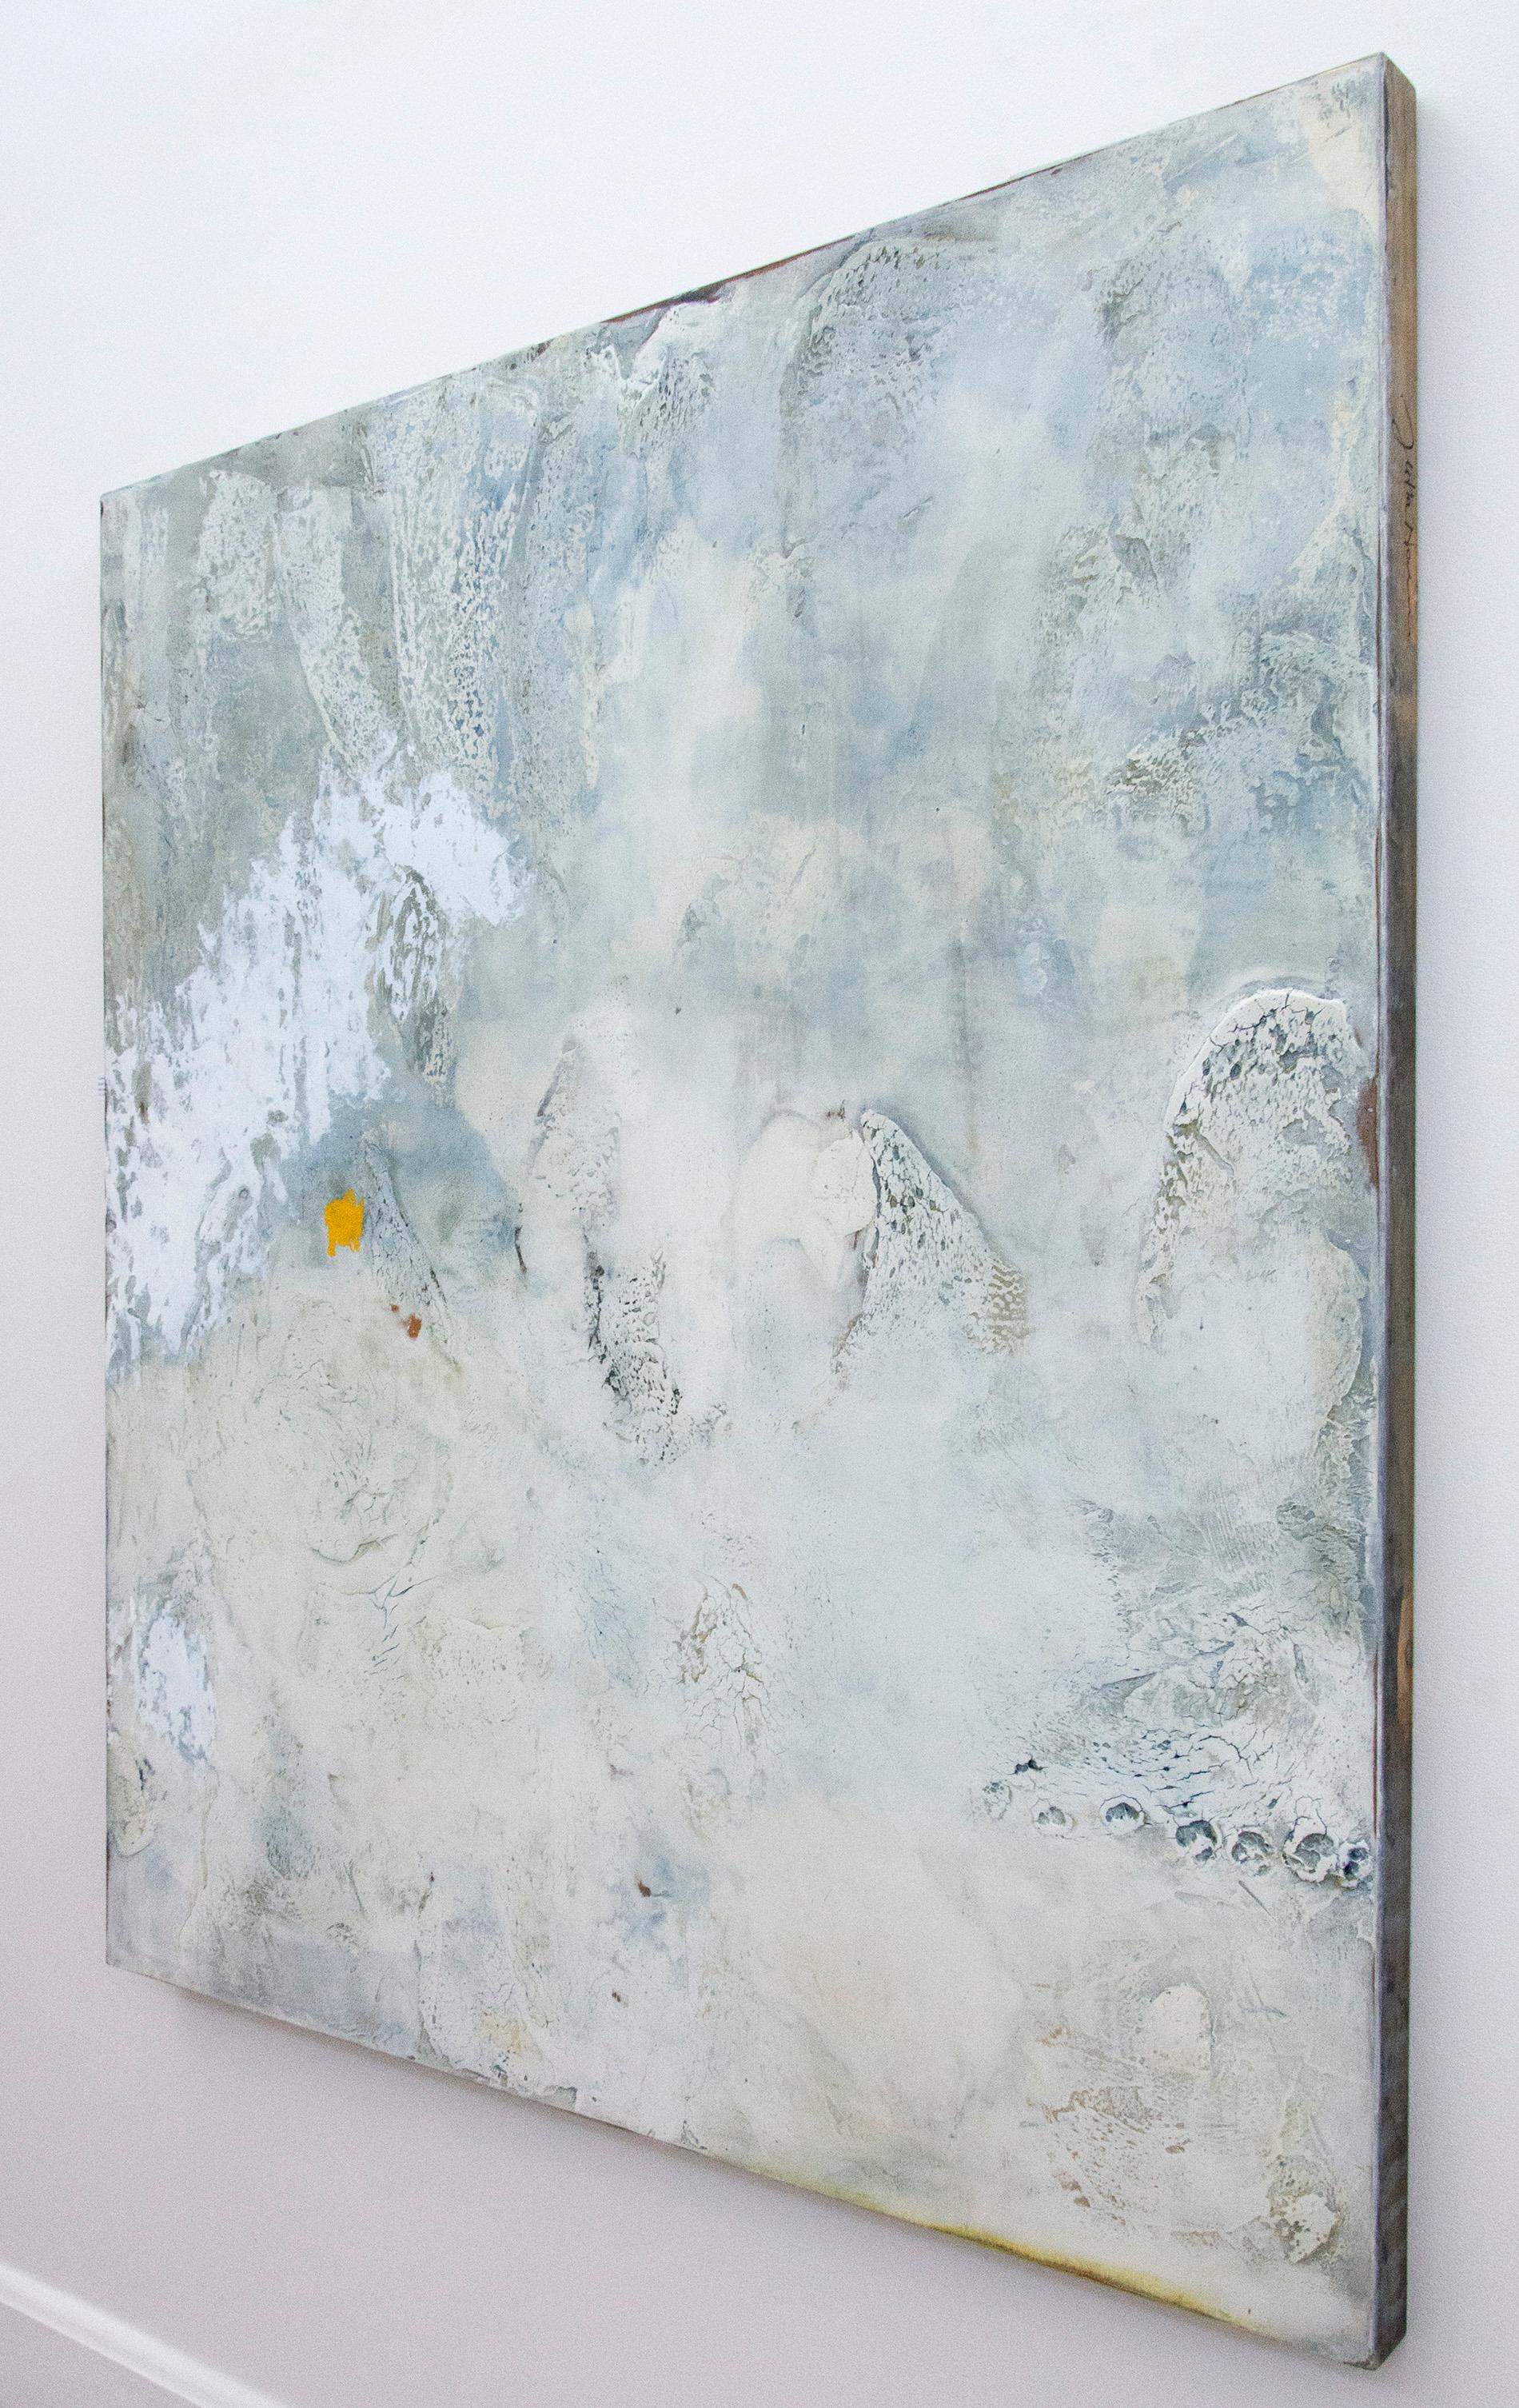 Washes of dove grey and light blue swirl across the tactile surface of this atmospheric plaster and pigment painting by Jutta Naim. Marks pulled by hand through the plaster, thick and deliberately cracking dynamically in areas, create a lively and